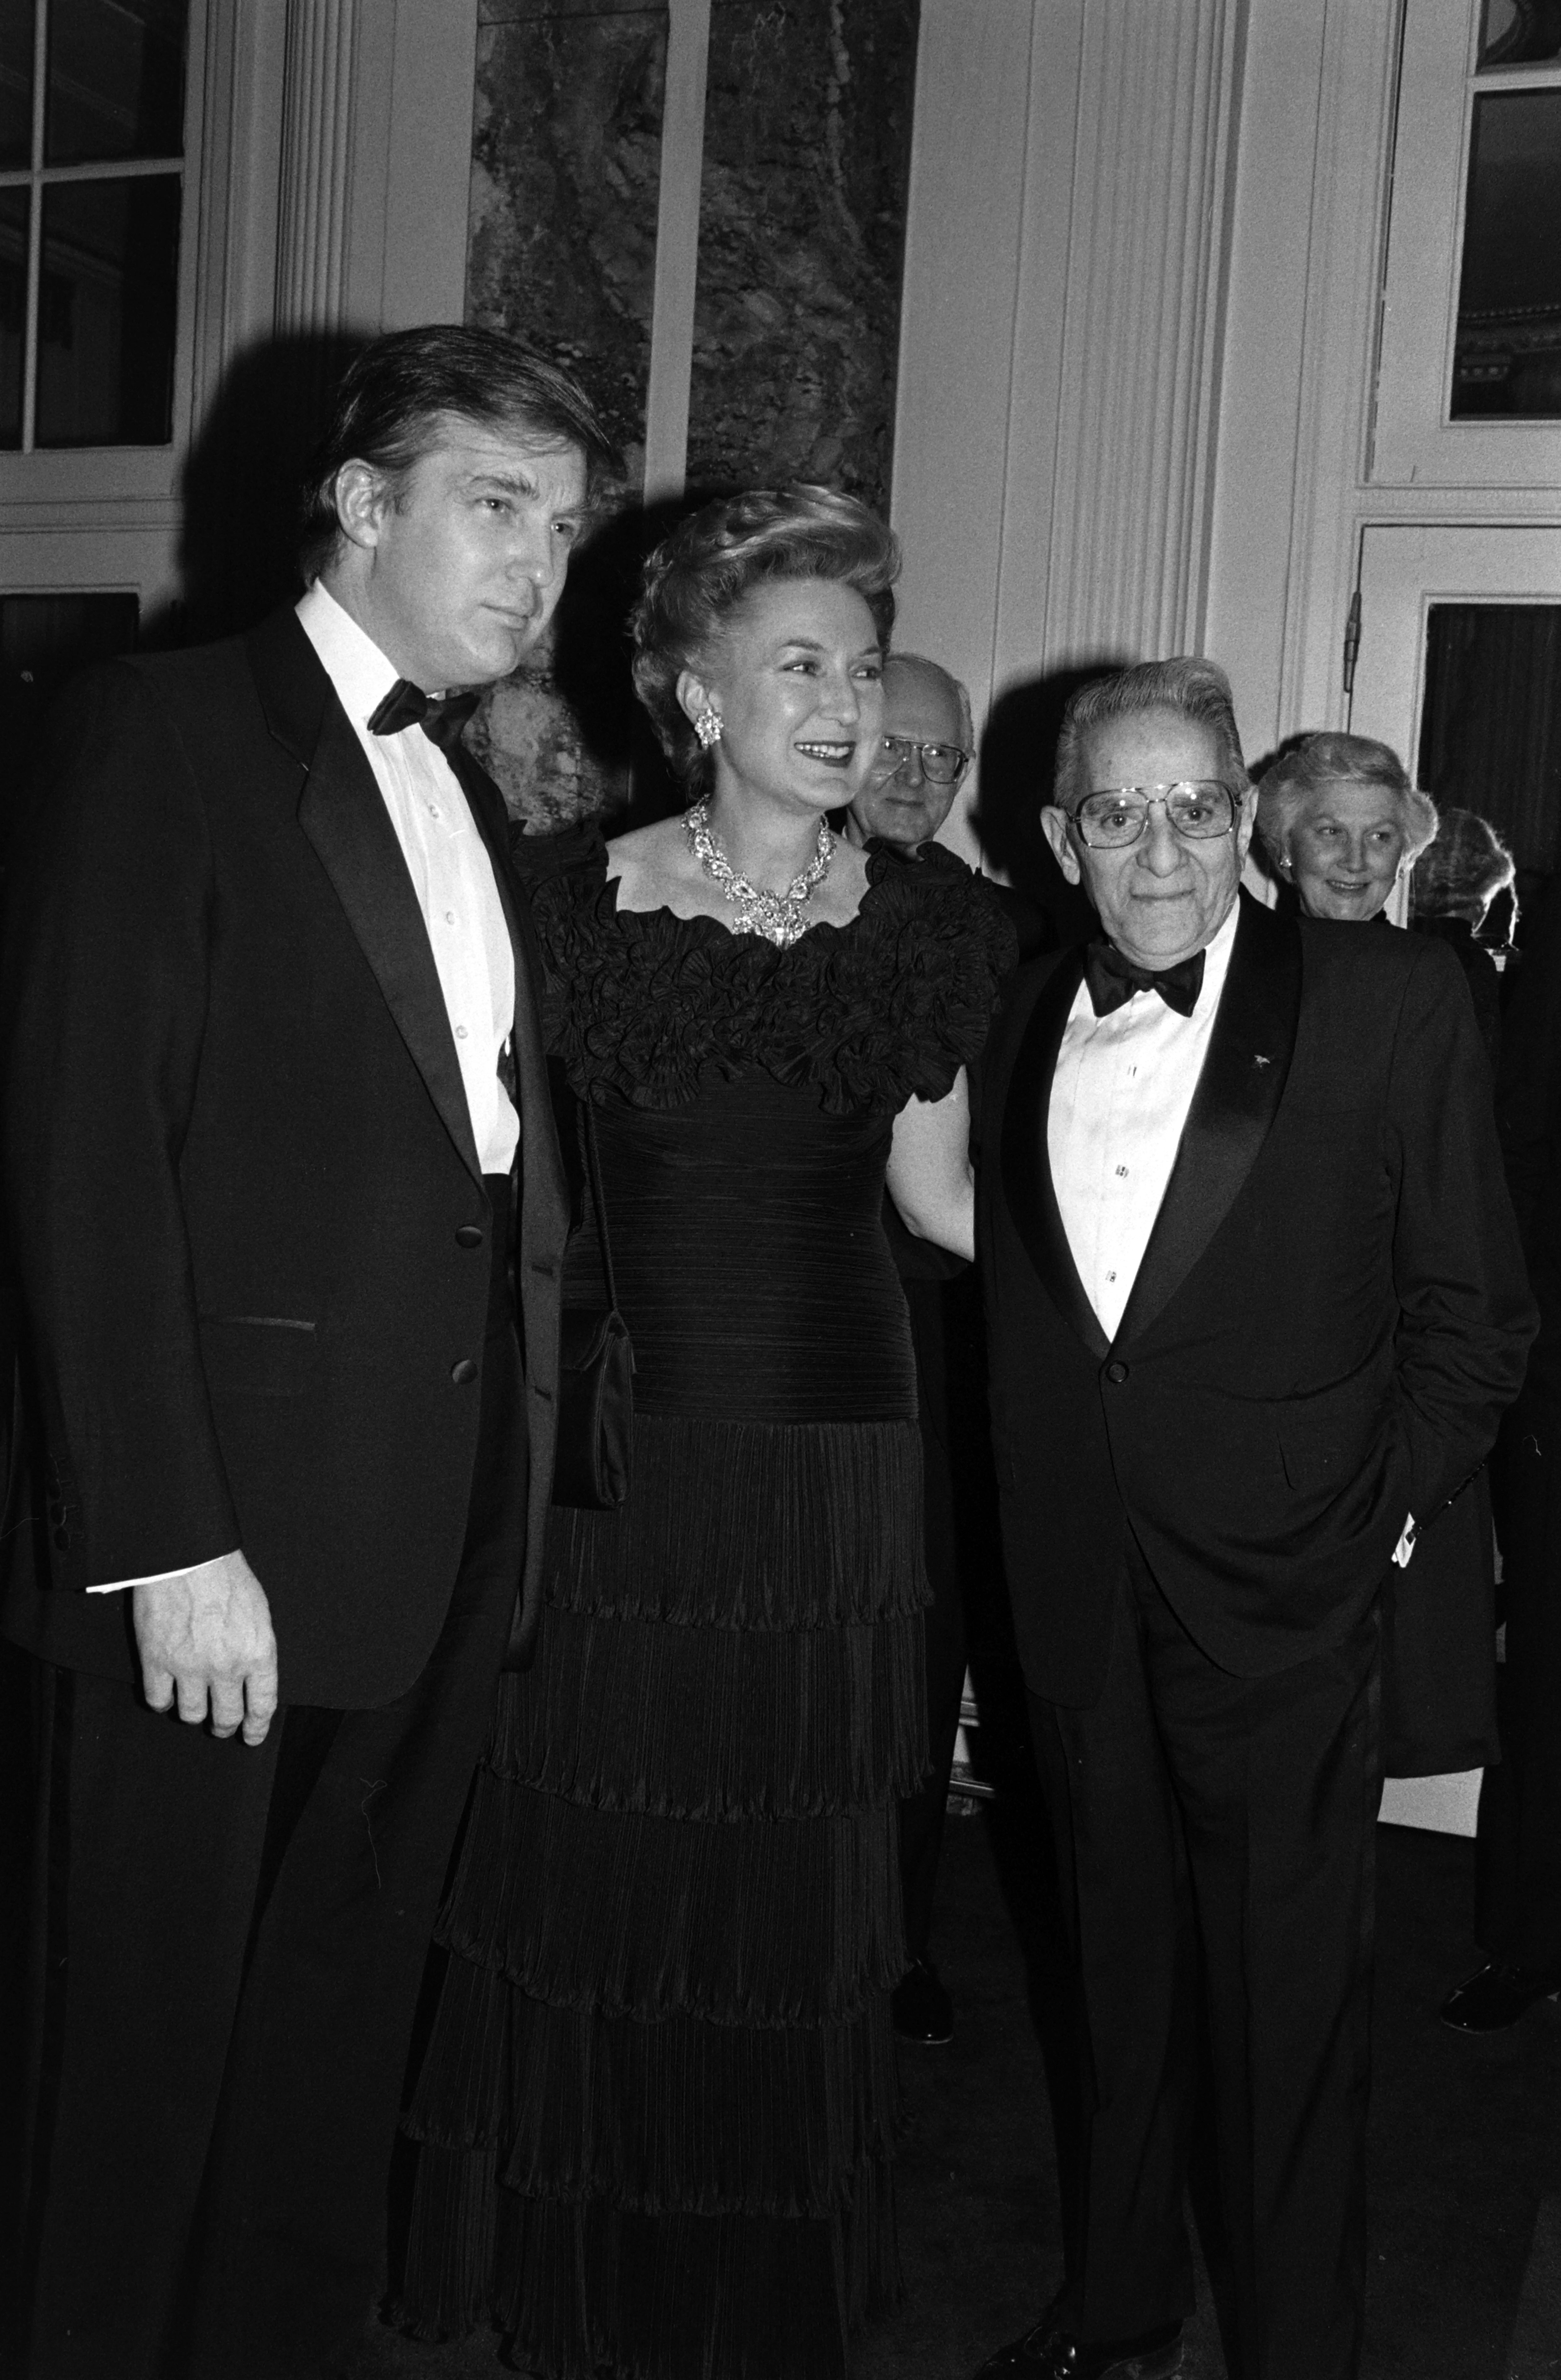 Donald and Maryanne Trump attend the Waldorf Astoria Hotel in New York City on December 14, 1988 for Ivana's United Cerebral Palsy Humanitarian Award | Source: Getty Images